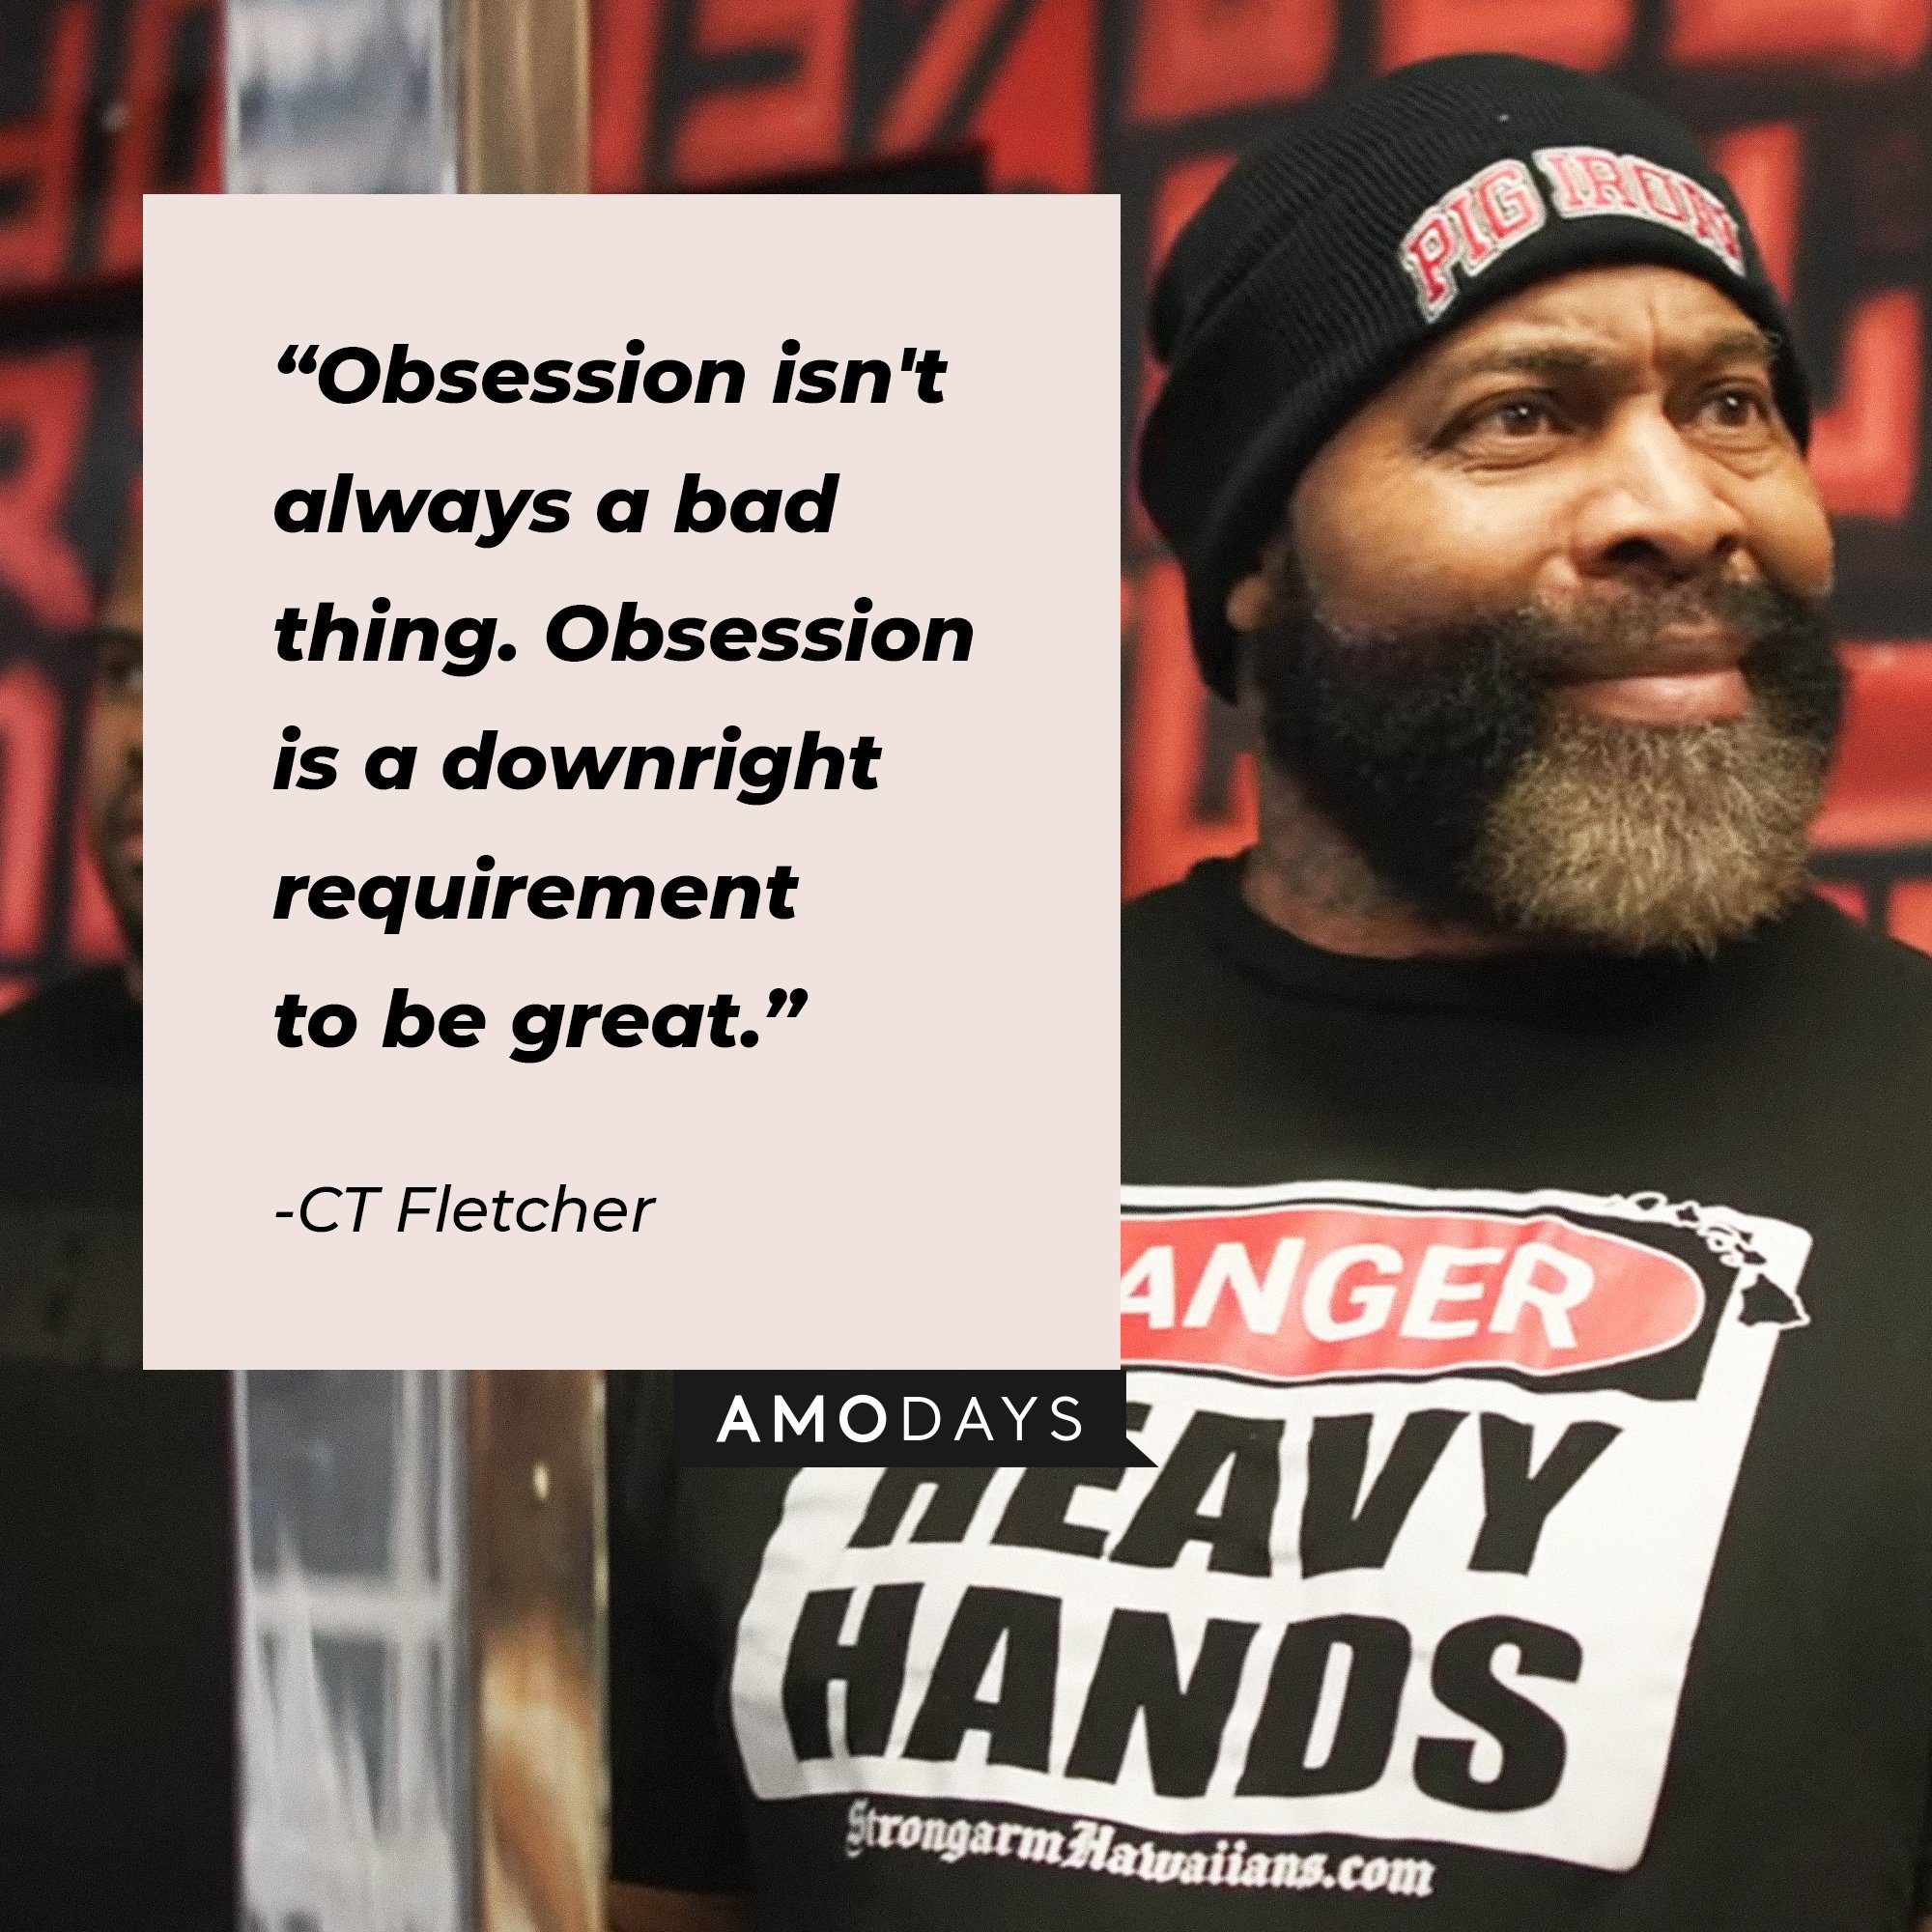 CT Fletcher's quote:\\\\\\\\u00a0"Obsession isn't always a bad thing. Obsession is a downright requirement to be great."\\\\\\\\u00a0| Image: AmoDays